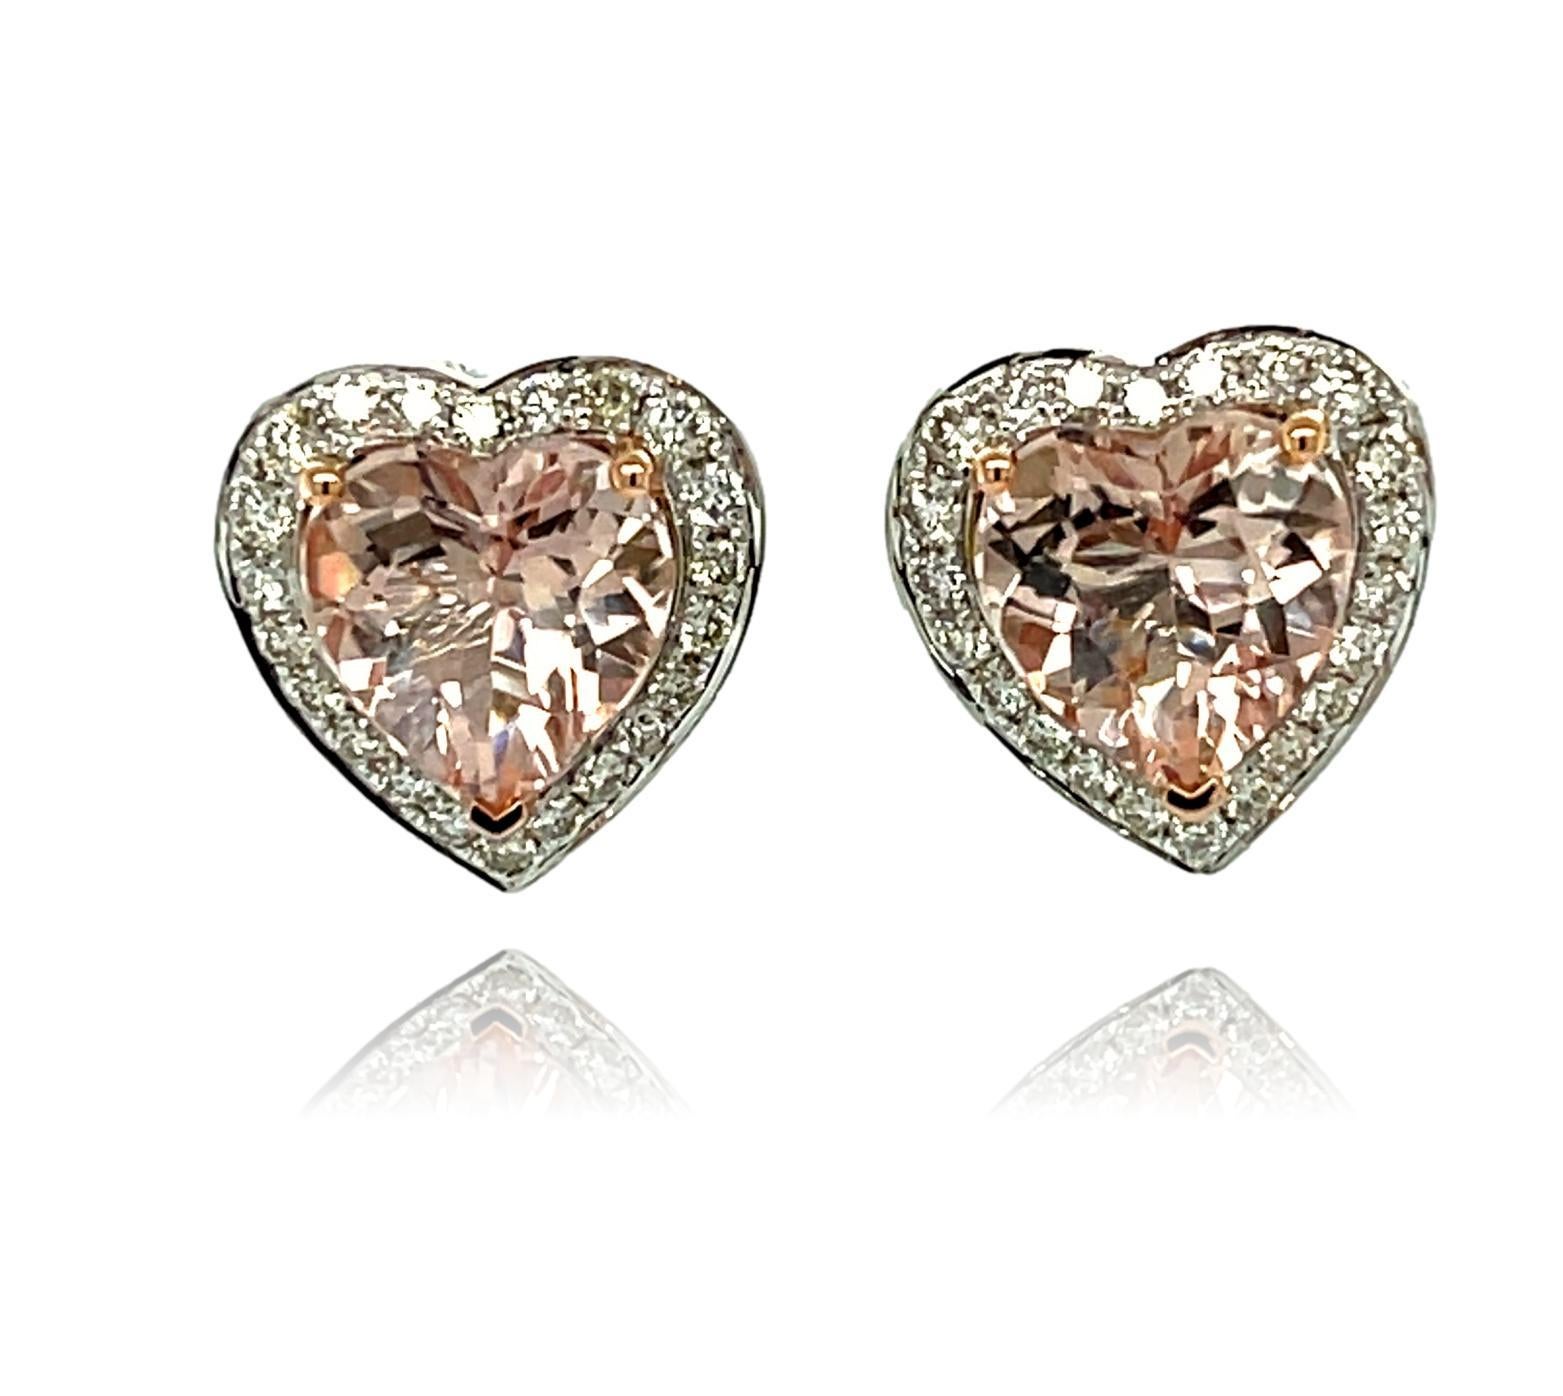 These adorable Heart shaped Morganite stud earrings have a halo of shimmering diamonds around them. The center stone has three prong setting in Rose gold for the perfect accent. There is a double push lock closure for extra security. These earrings